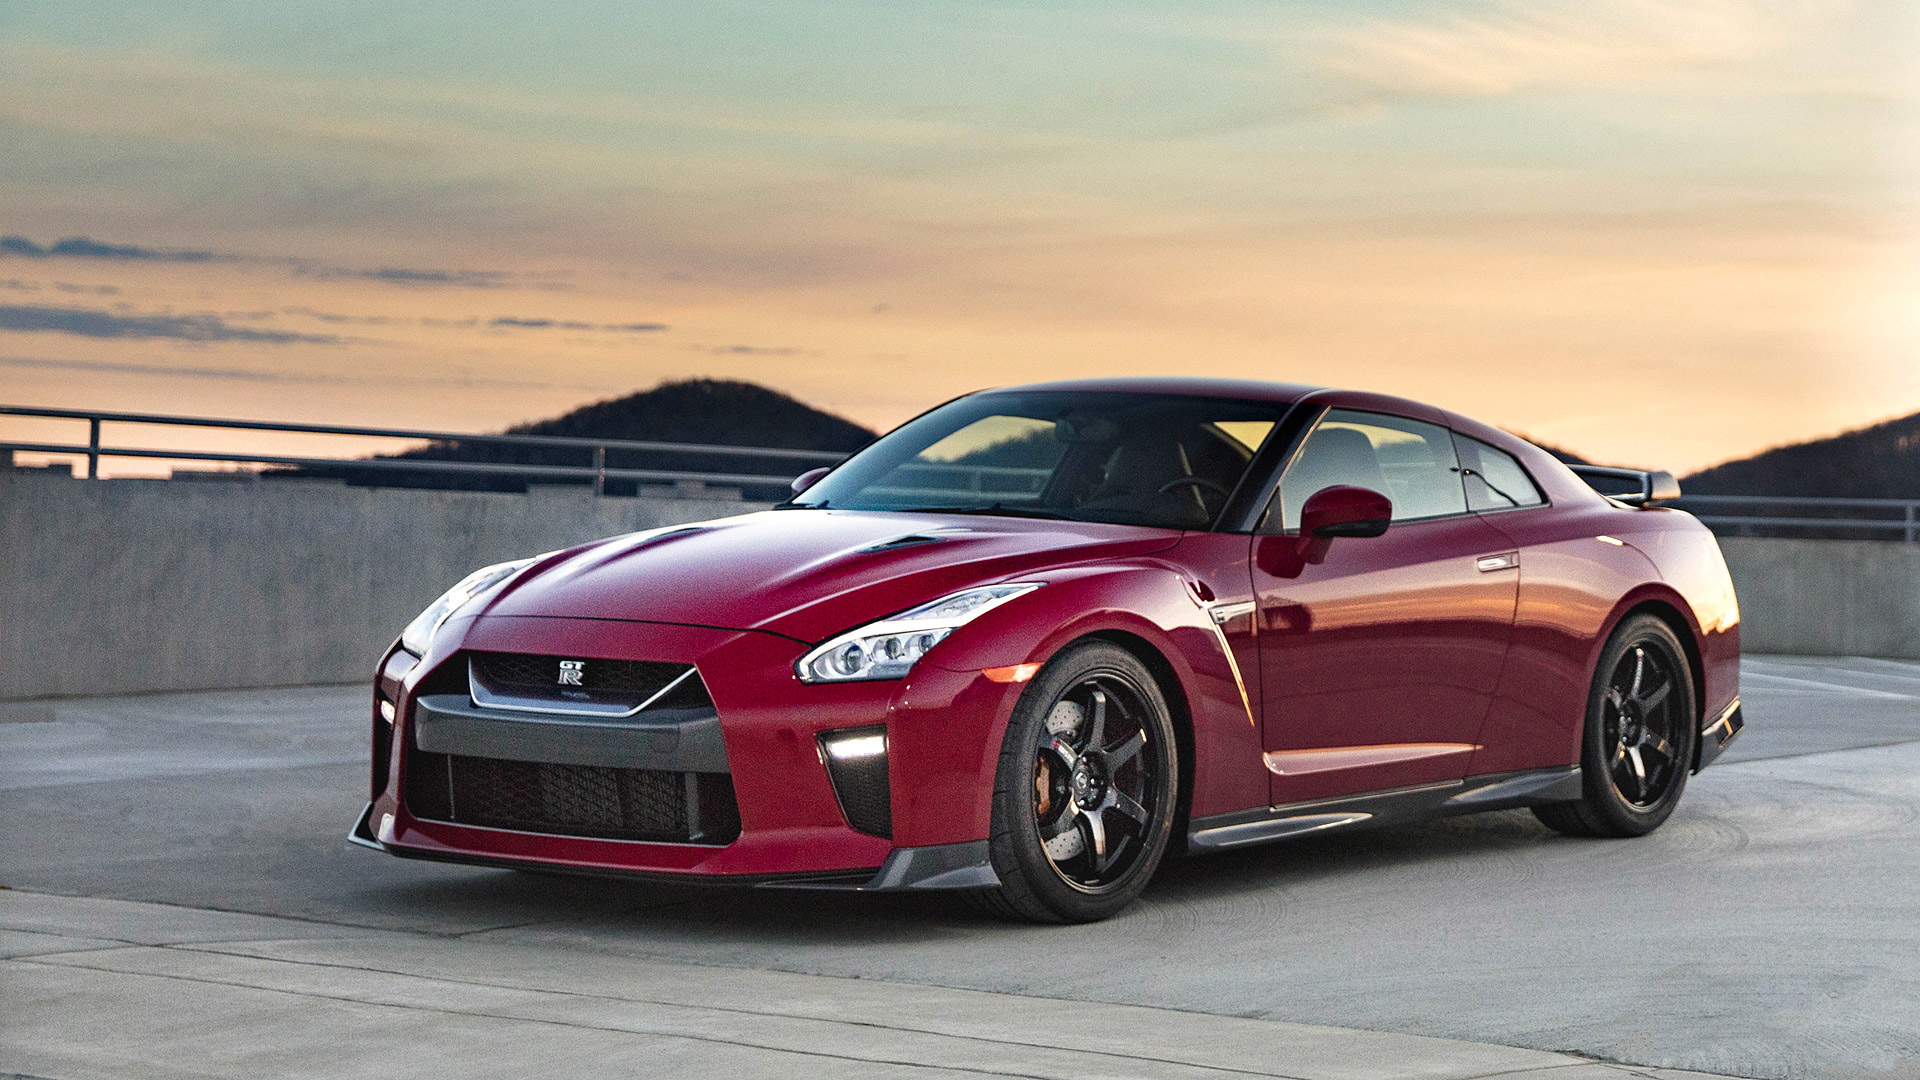 Nissan Gt R Track Edition Wallpaper HD Image